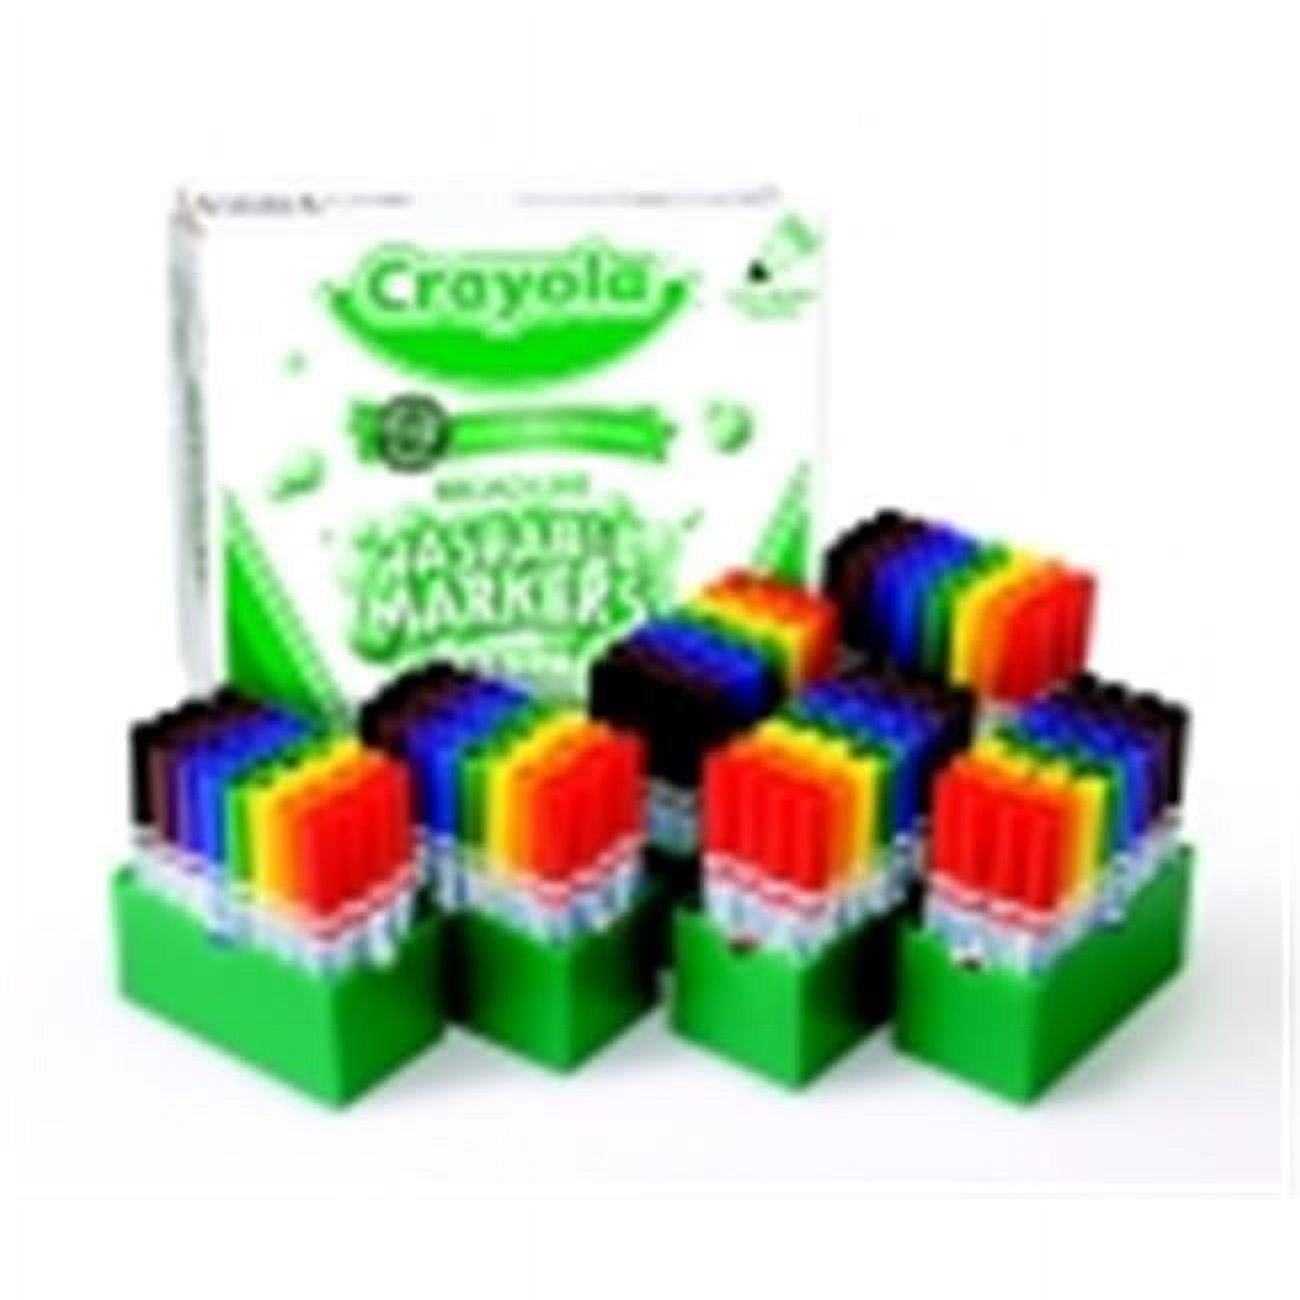 Crayola Washable Marker Classroom Set, Conical Tip, 8 Assorted